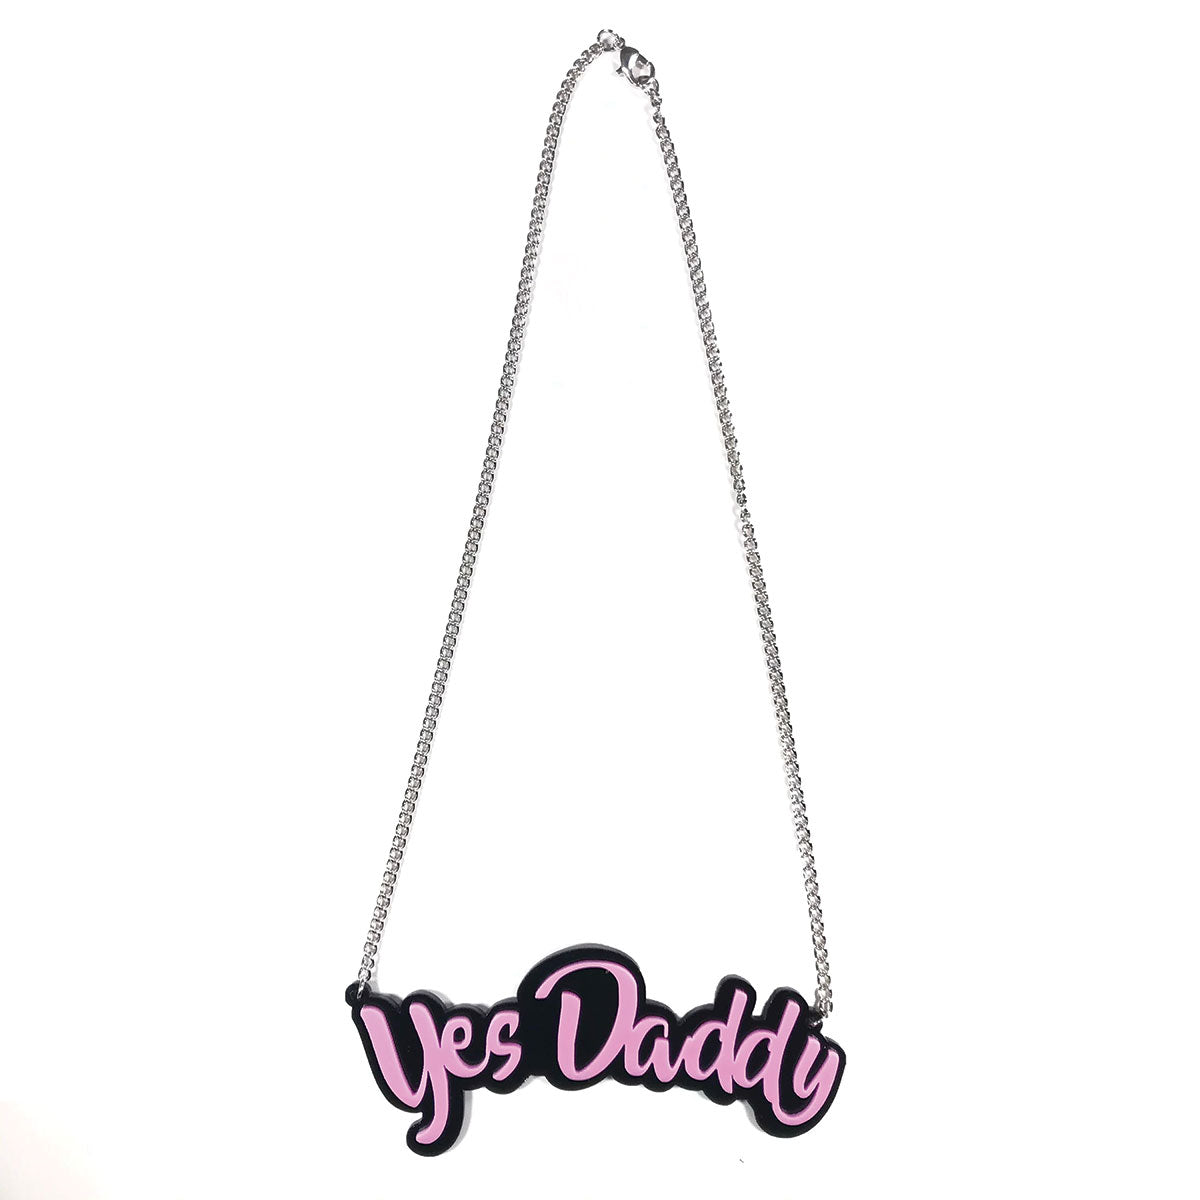 Geeky & Kinky Yes Daddy Necklace - Fetishwear and Lingerie